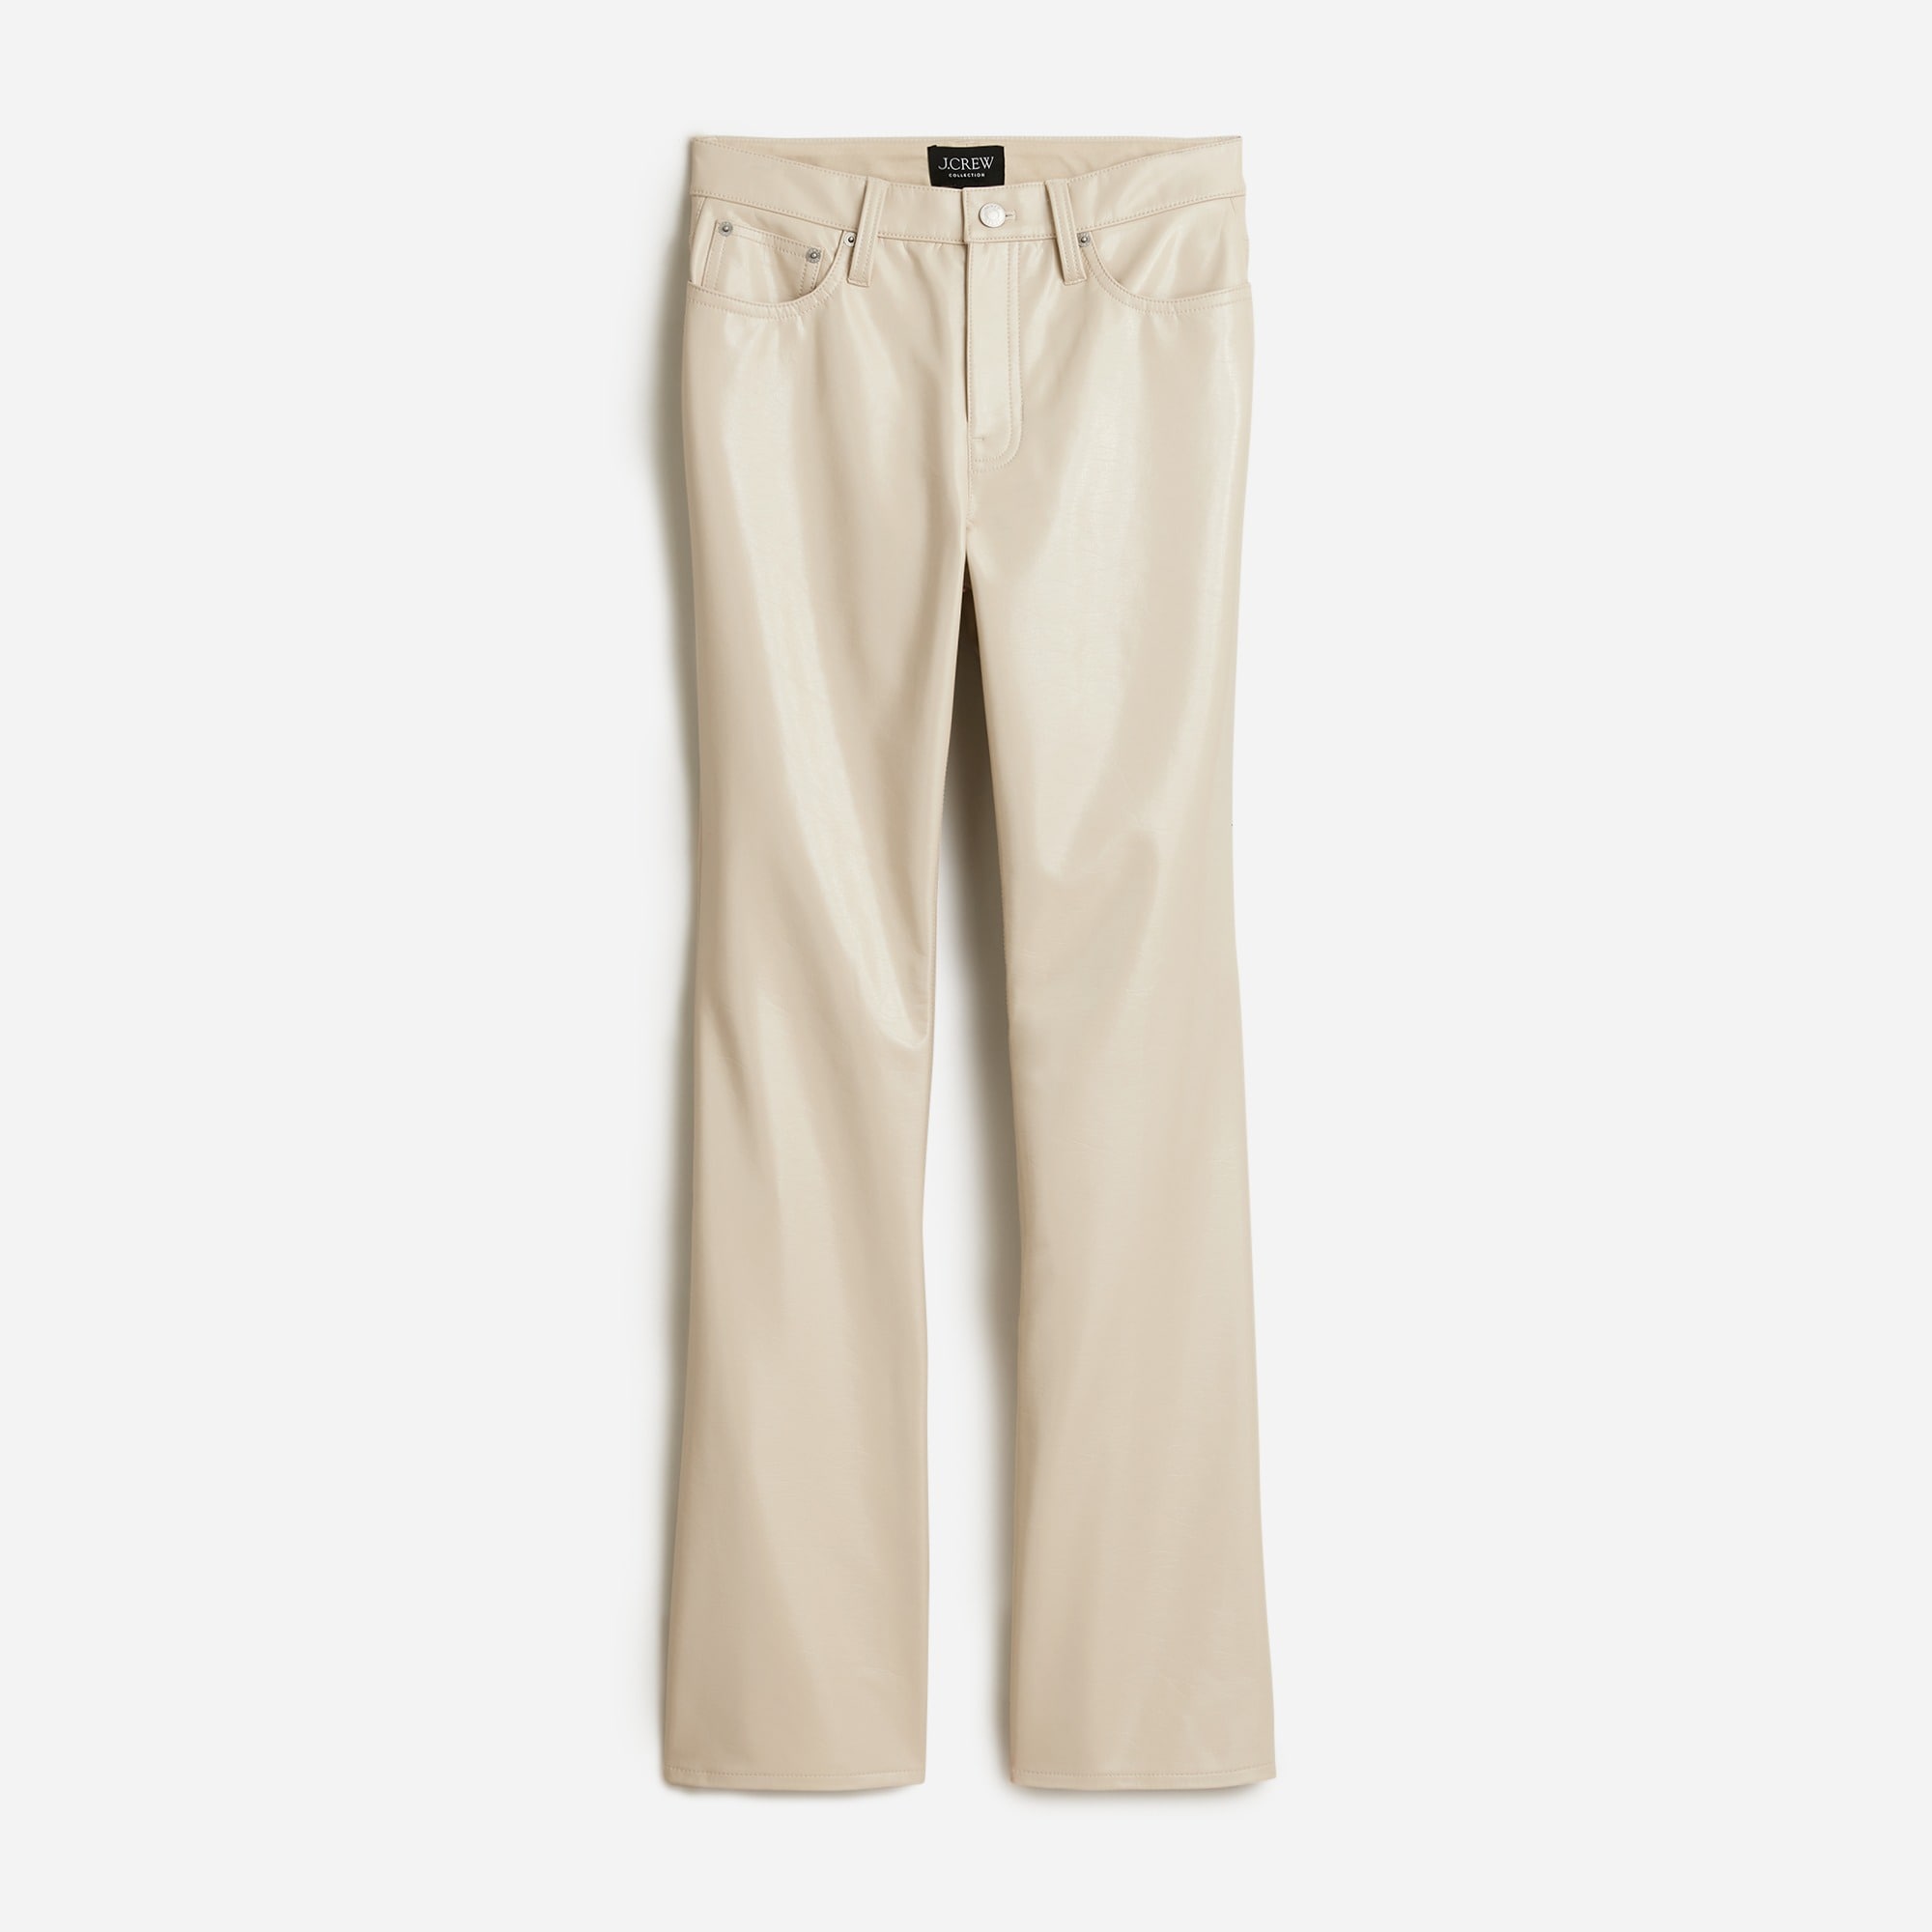  Collection demi-boot pant in faux patent leather